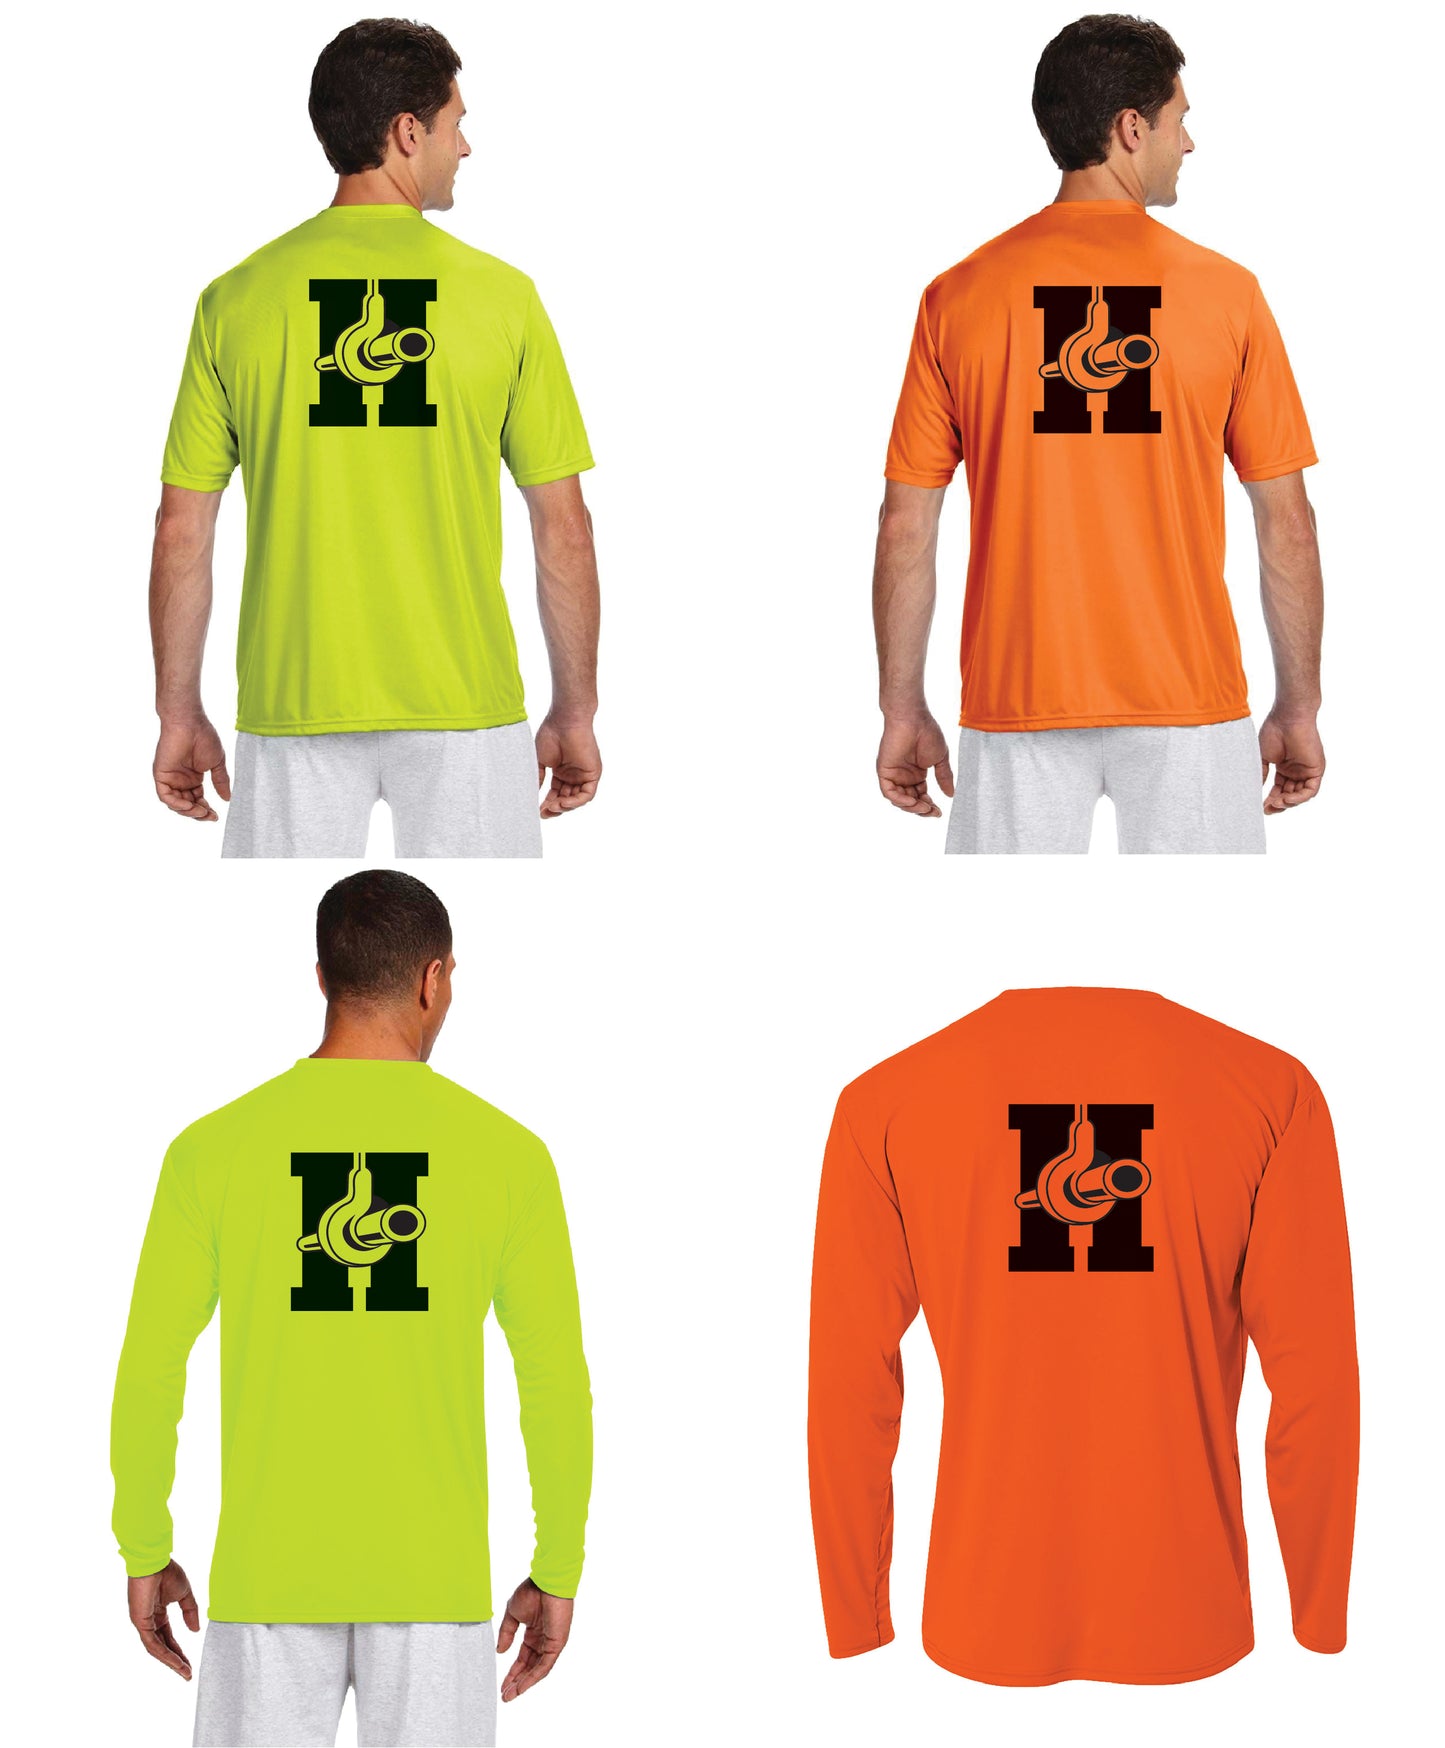 crossland heavy construction safety t-shirt 4 pack